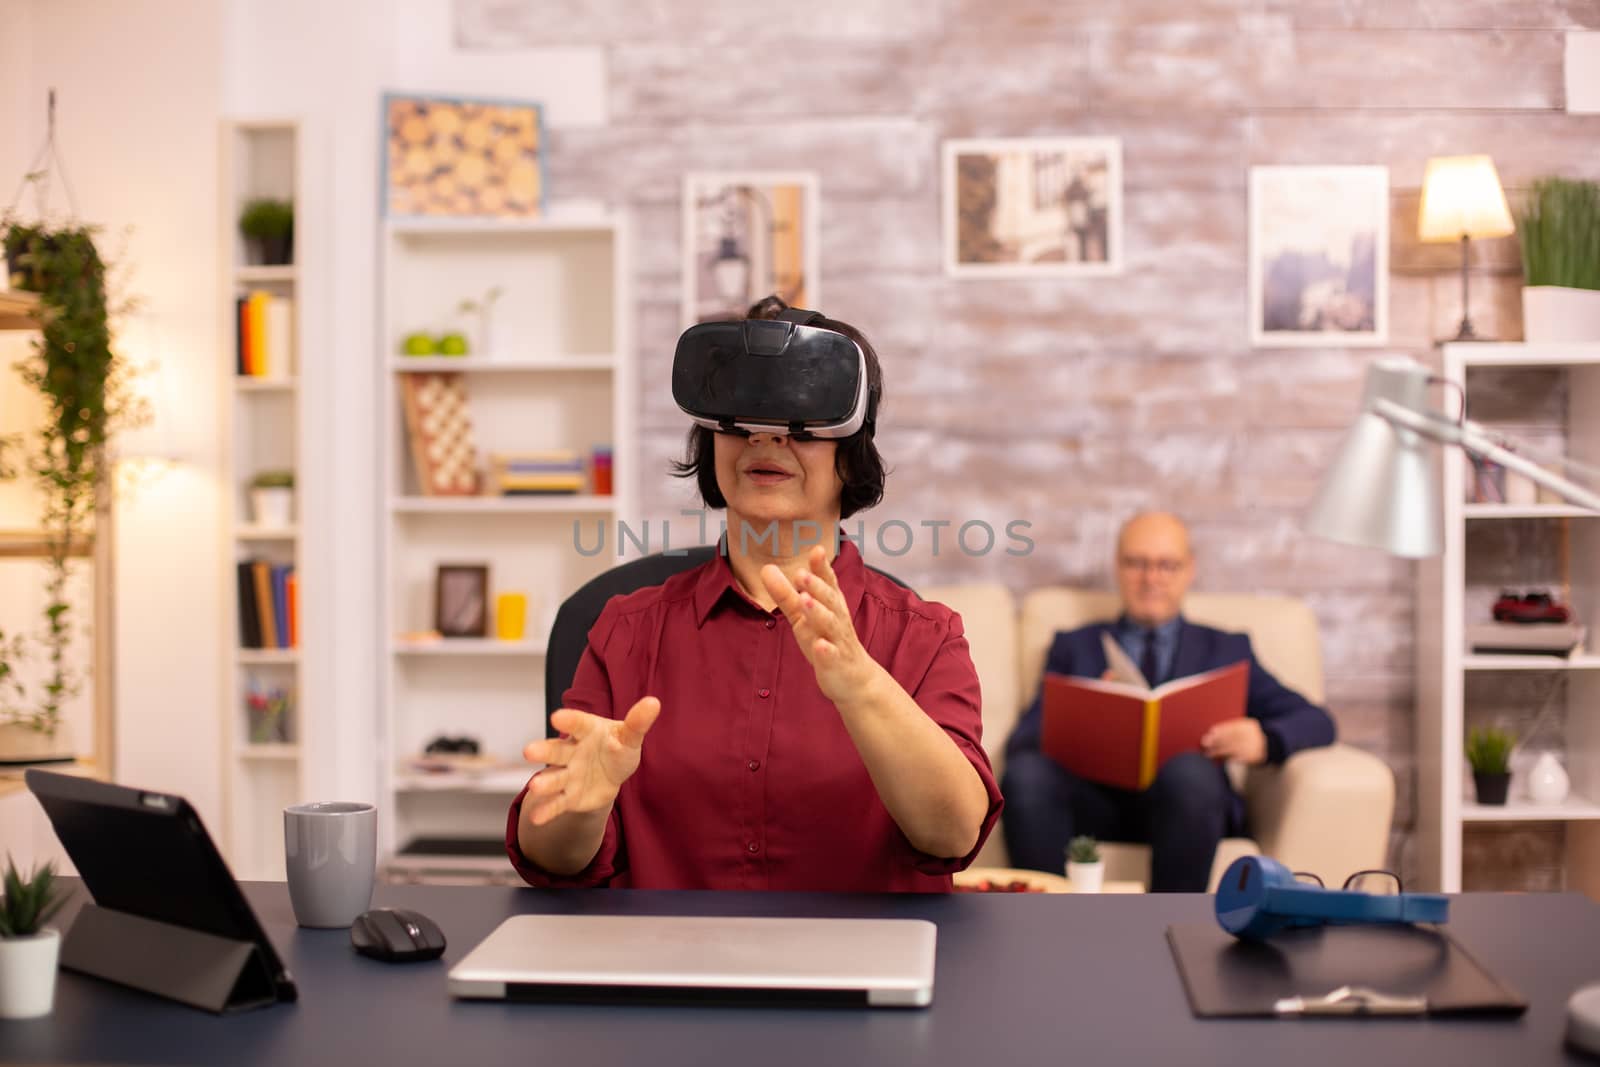 Old elderly woman using a VR virtual reality headset for the first time in her house. Concept of active elderly people using modern technology